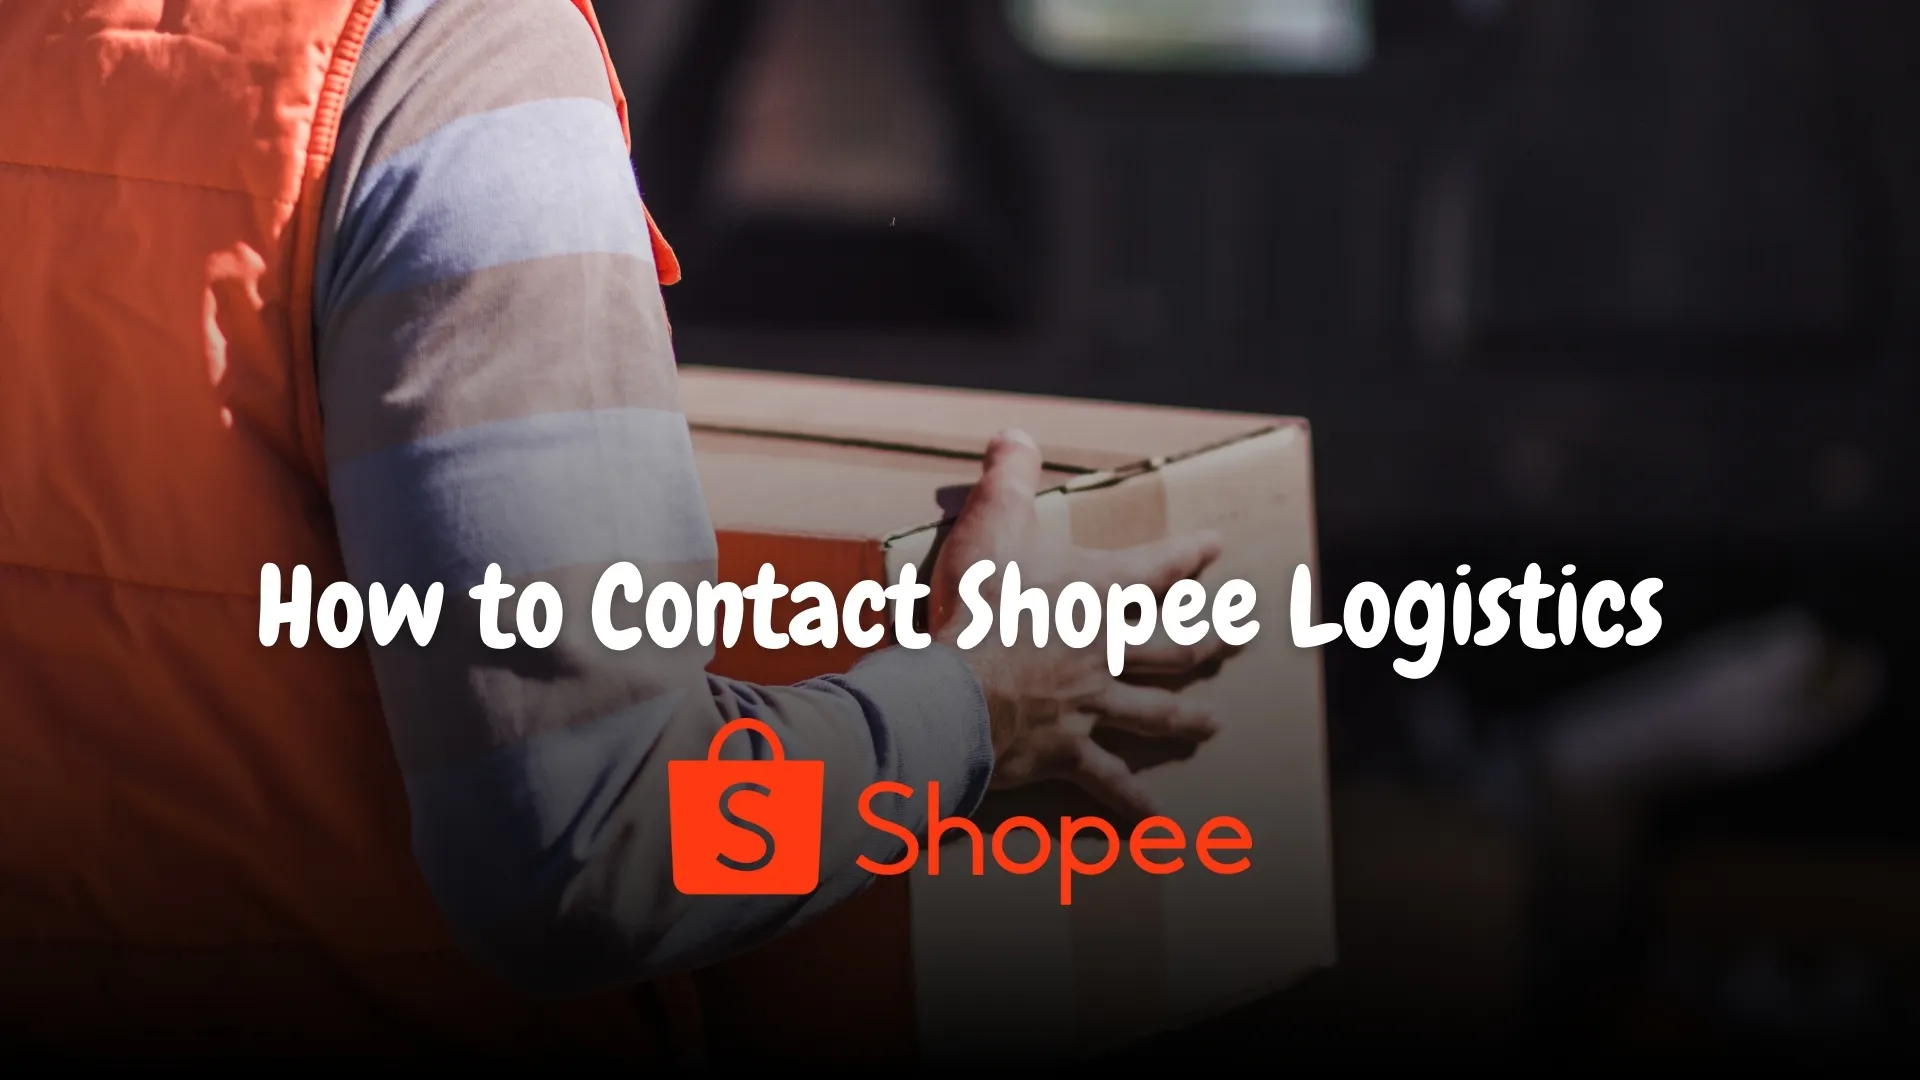 shopee delivery issues how to contact logistics directly